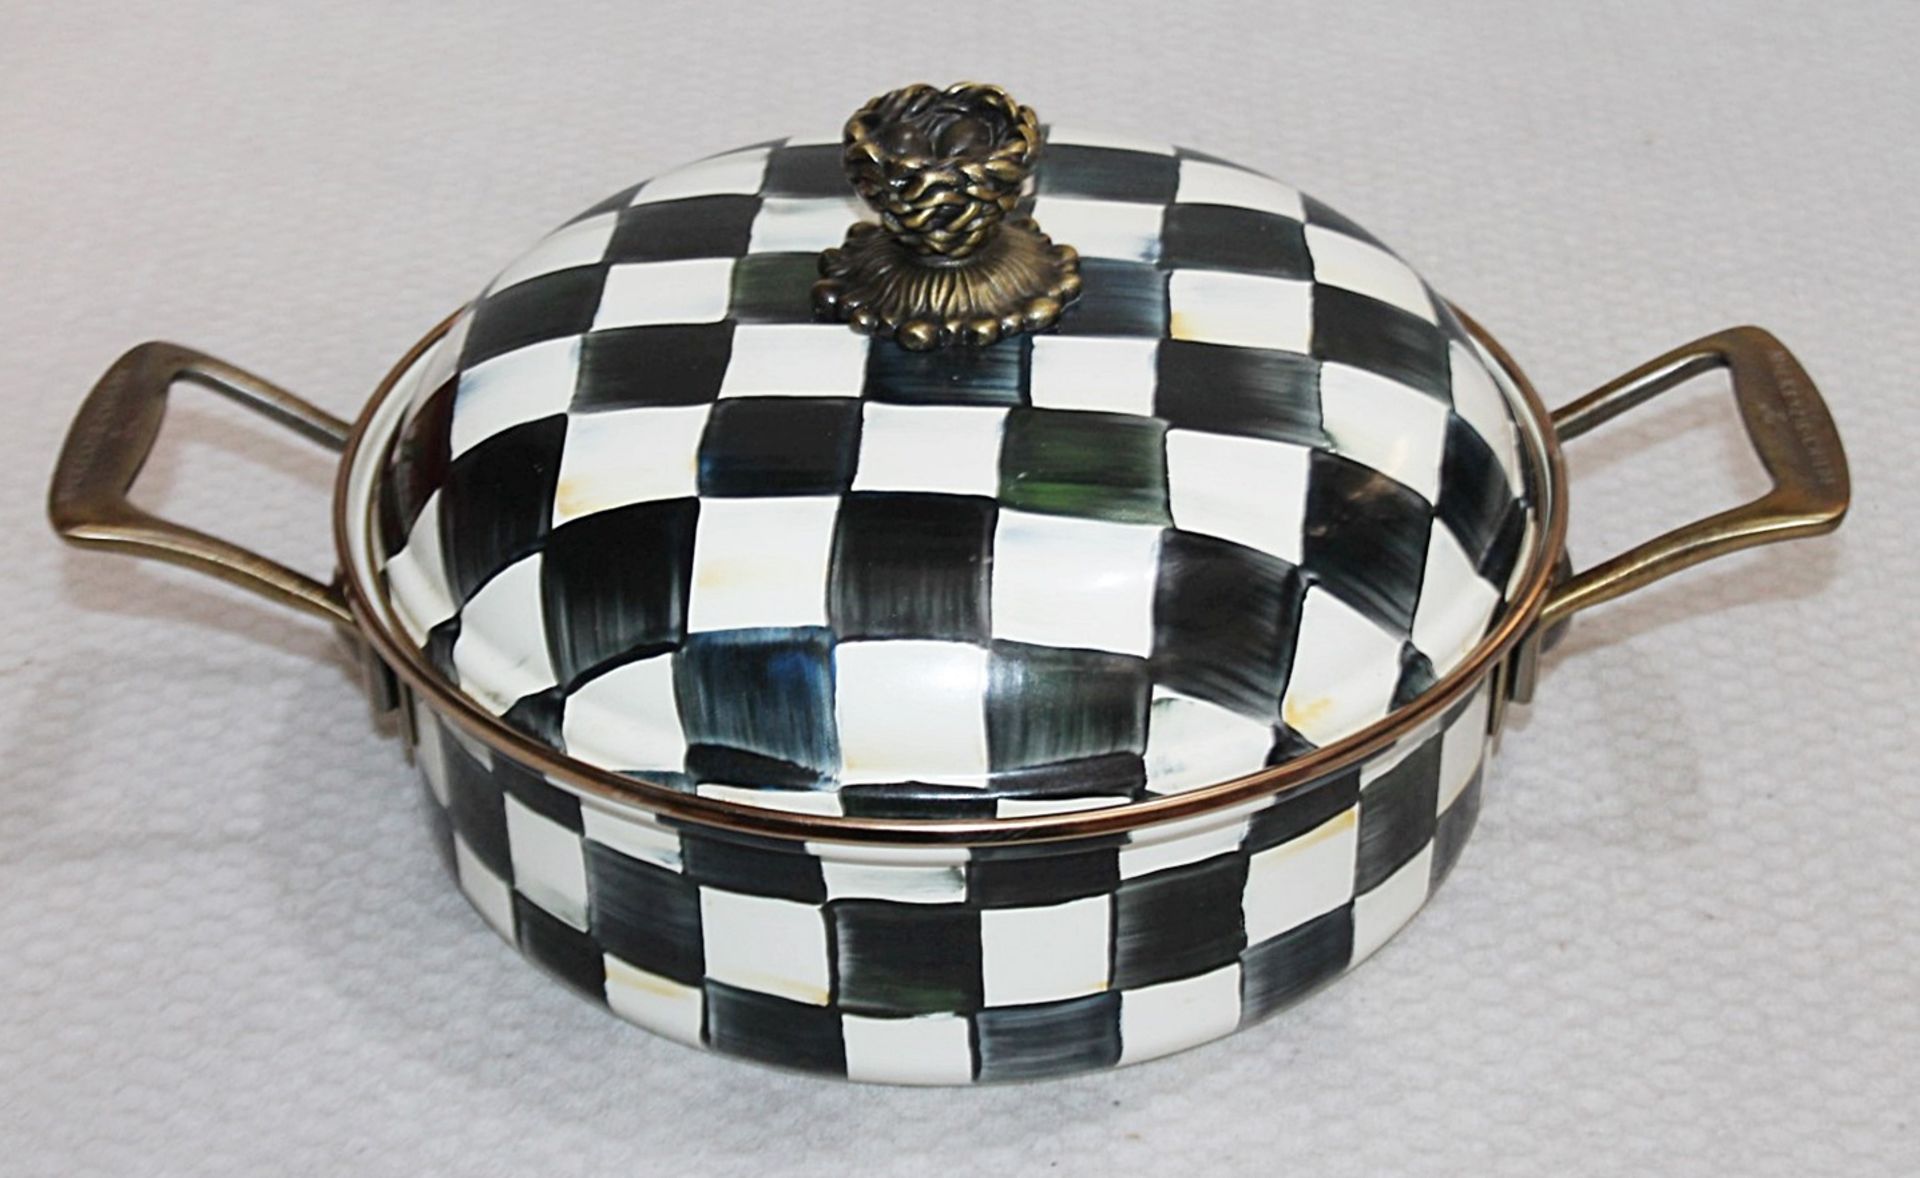 1 x MACKENZIE-CHILDS Courtly Check® Enamel 26cm Casserole Dish With Lid - Original Price £219.00 - - Image 2 of 7